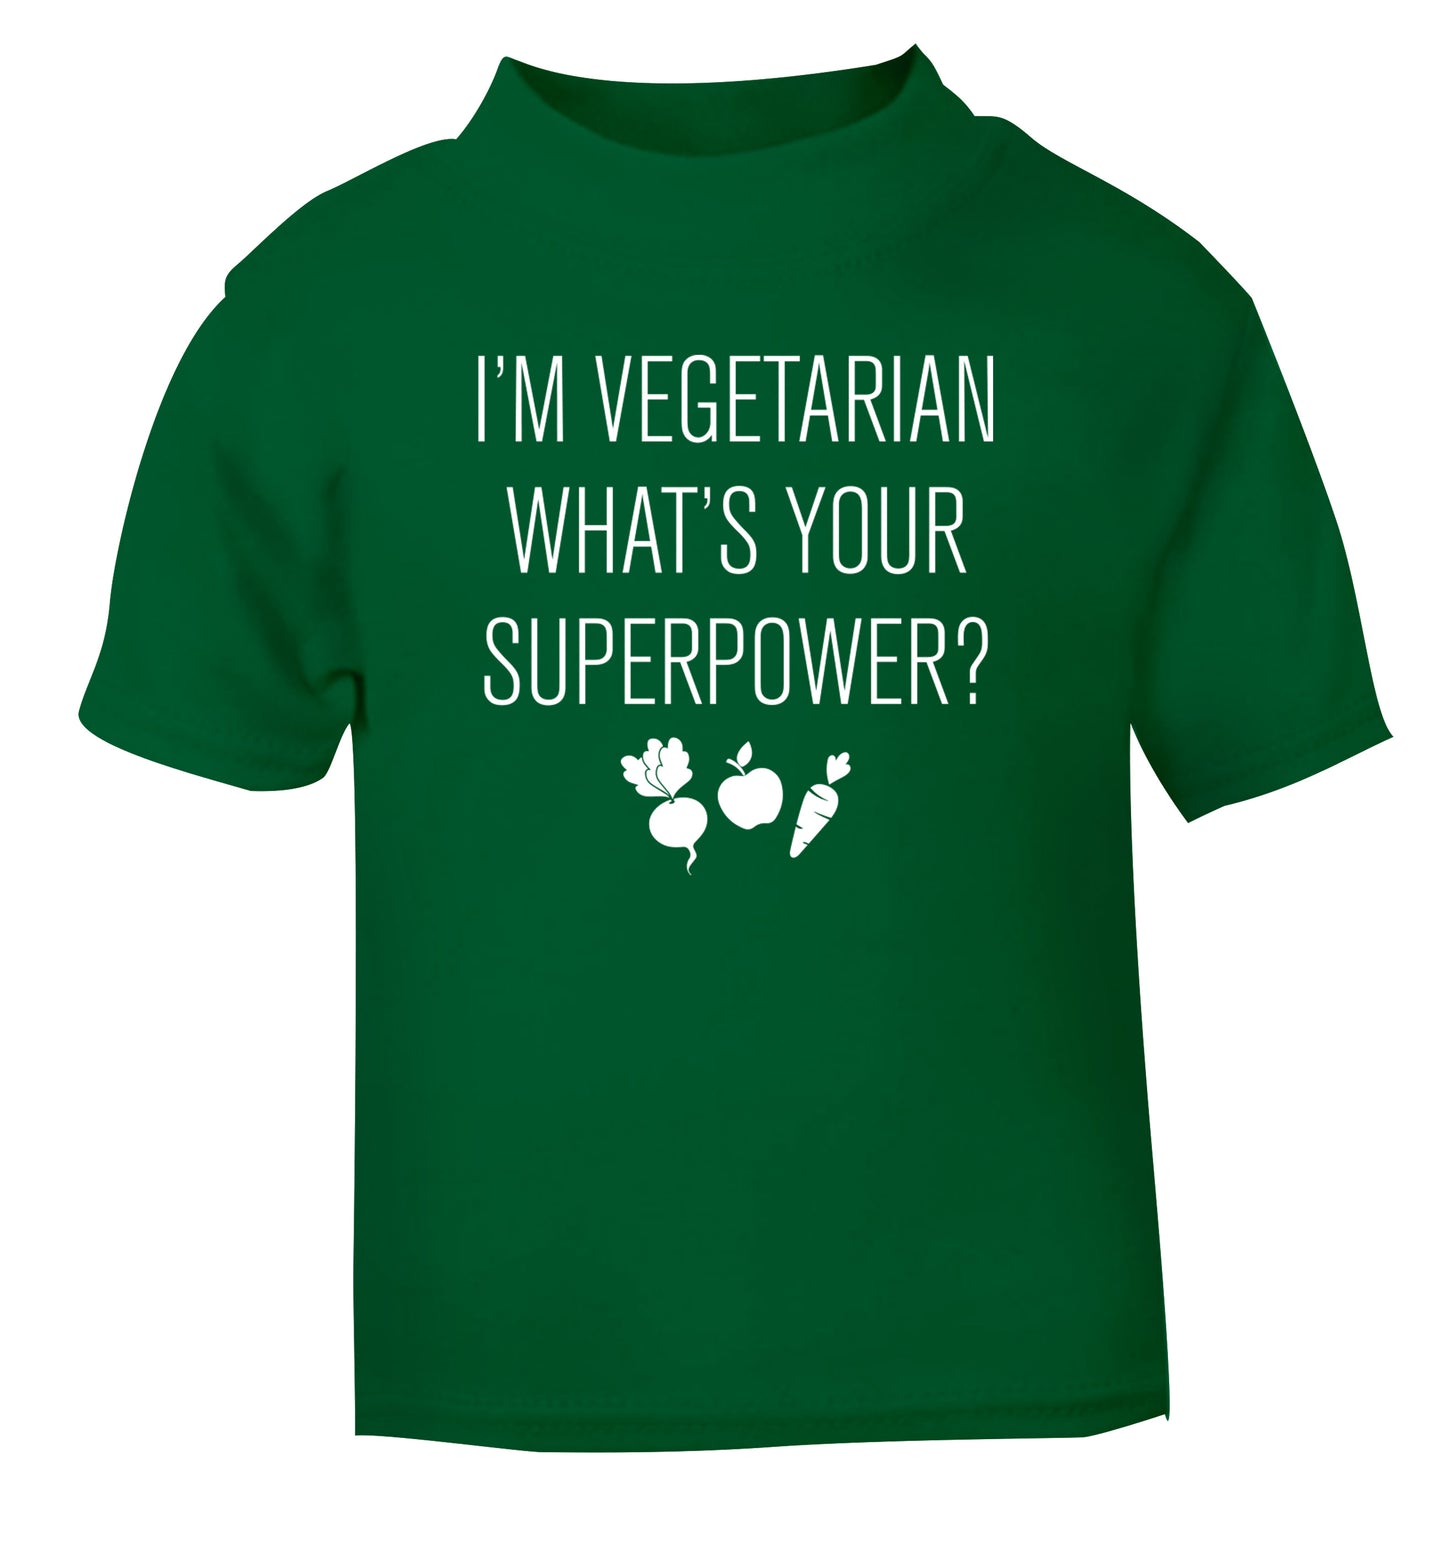 I'm vegetarian what's your superpower? green Baby Toddler Tshirt 2 Years